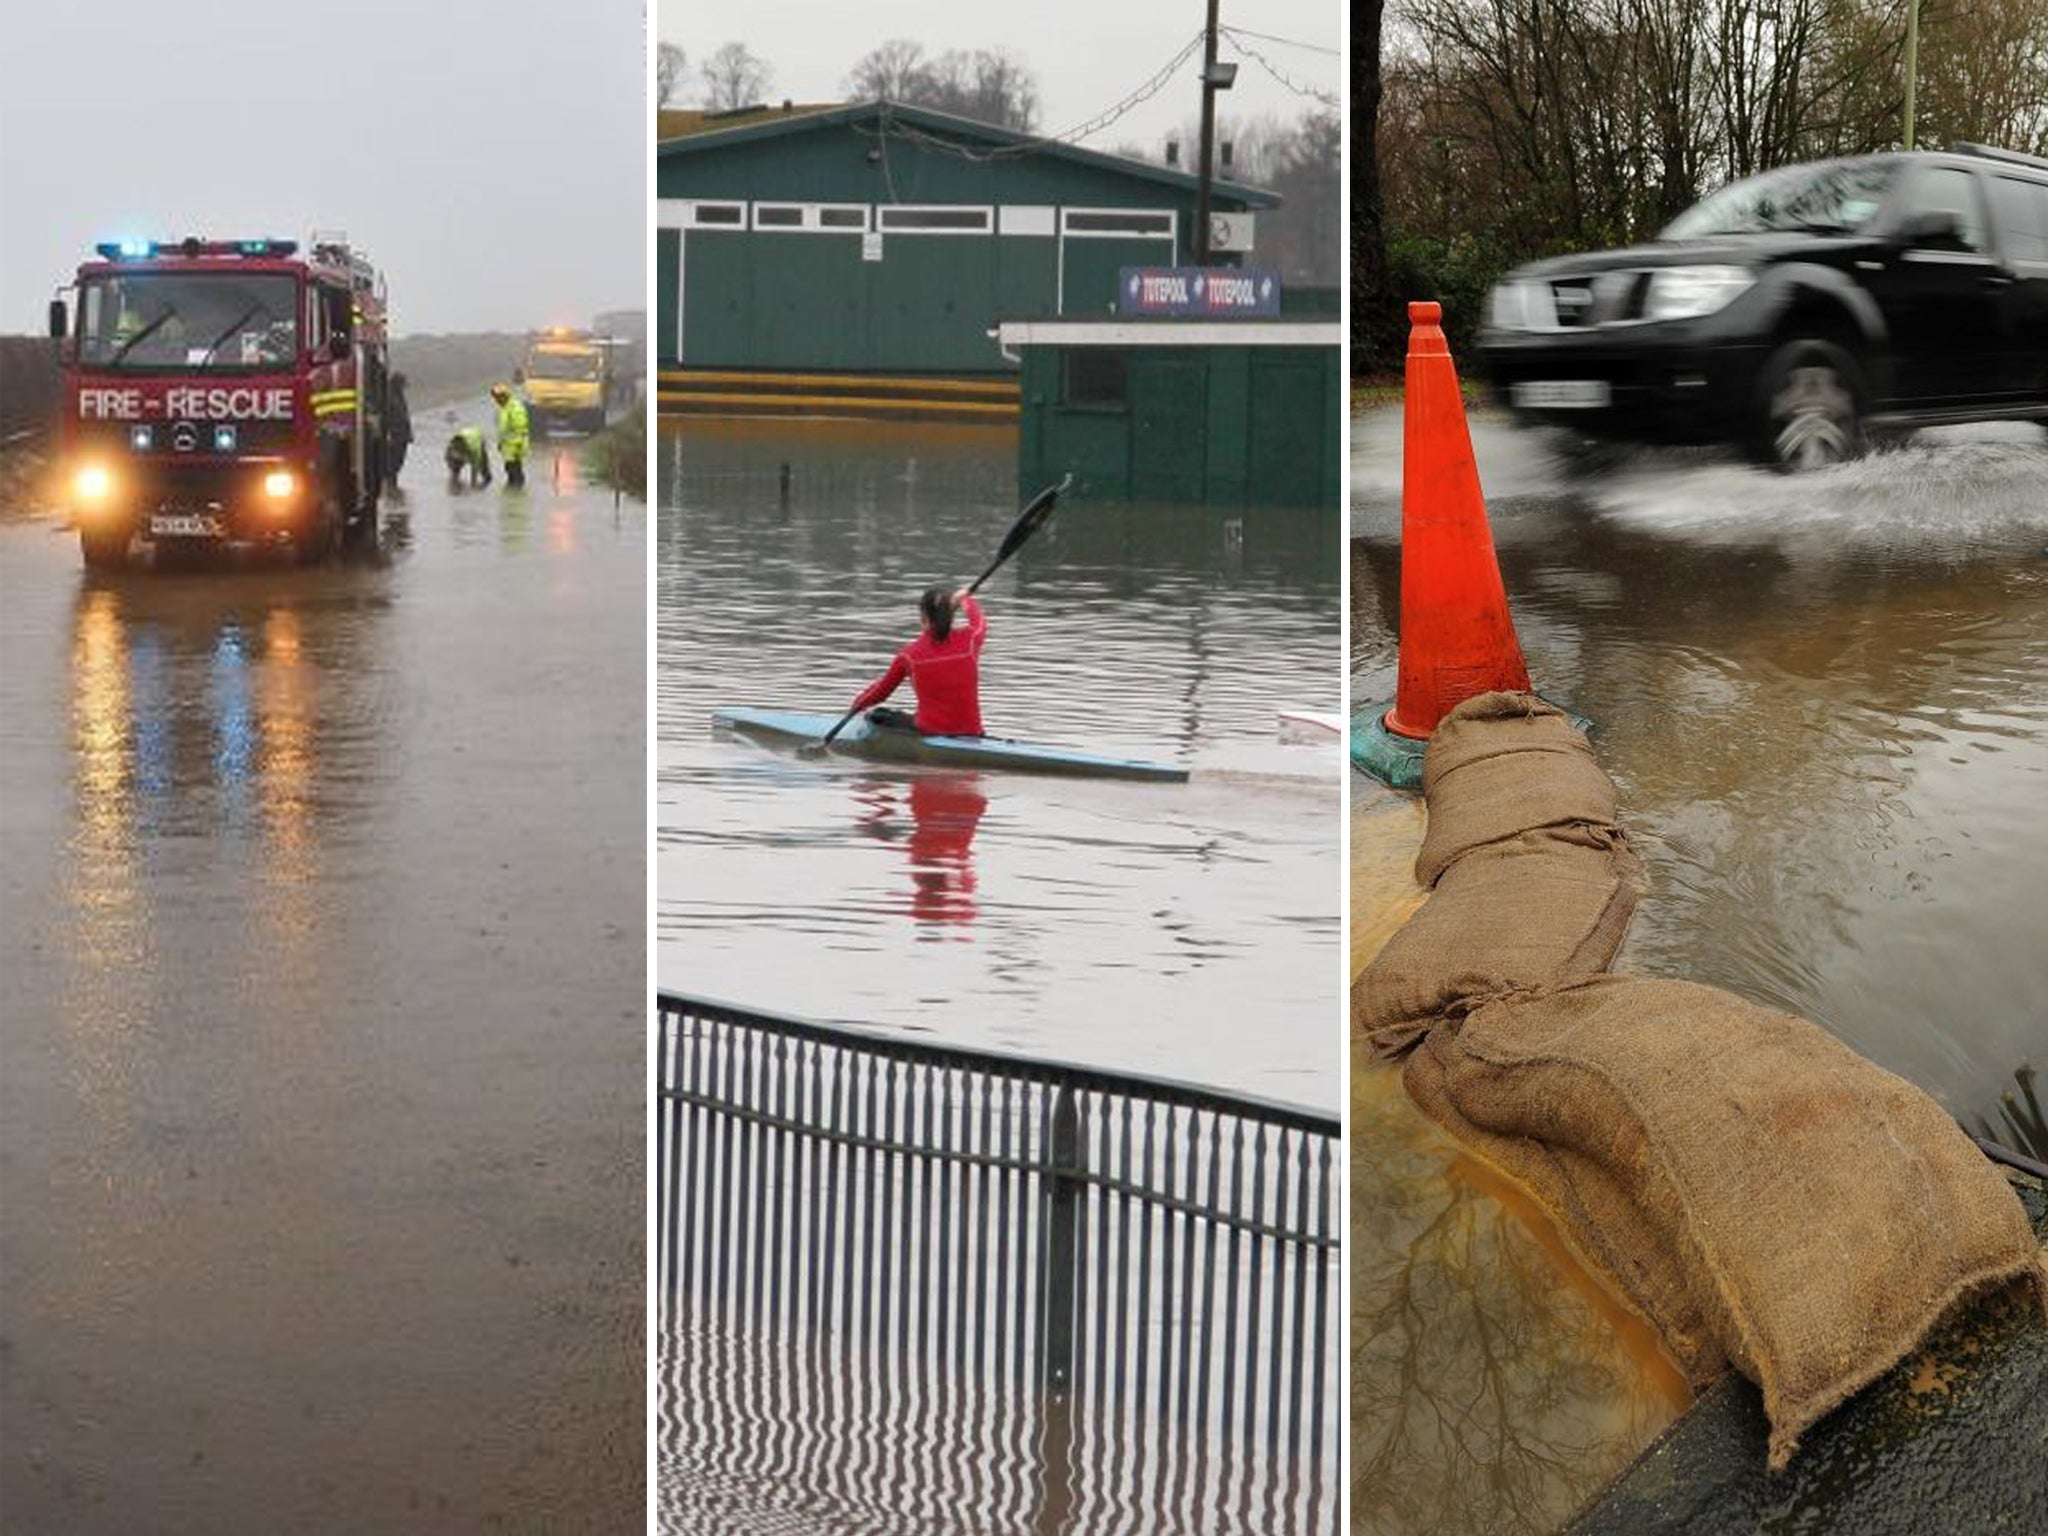 Fire and Rescue services work to clear a section of the A399 in North Devon, kayakers train on a flooded Worcester Racecourse and a vehicle makes its way through flood water on Calmore Road in Totton, Hampshire